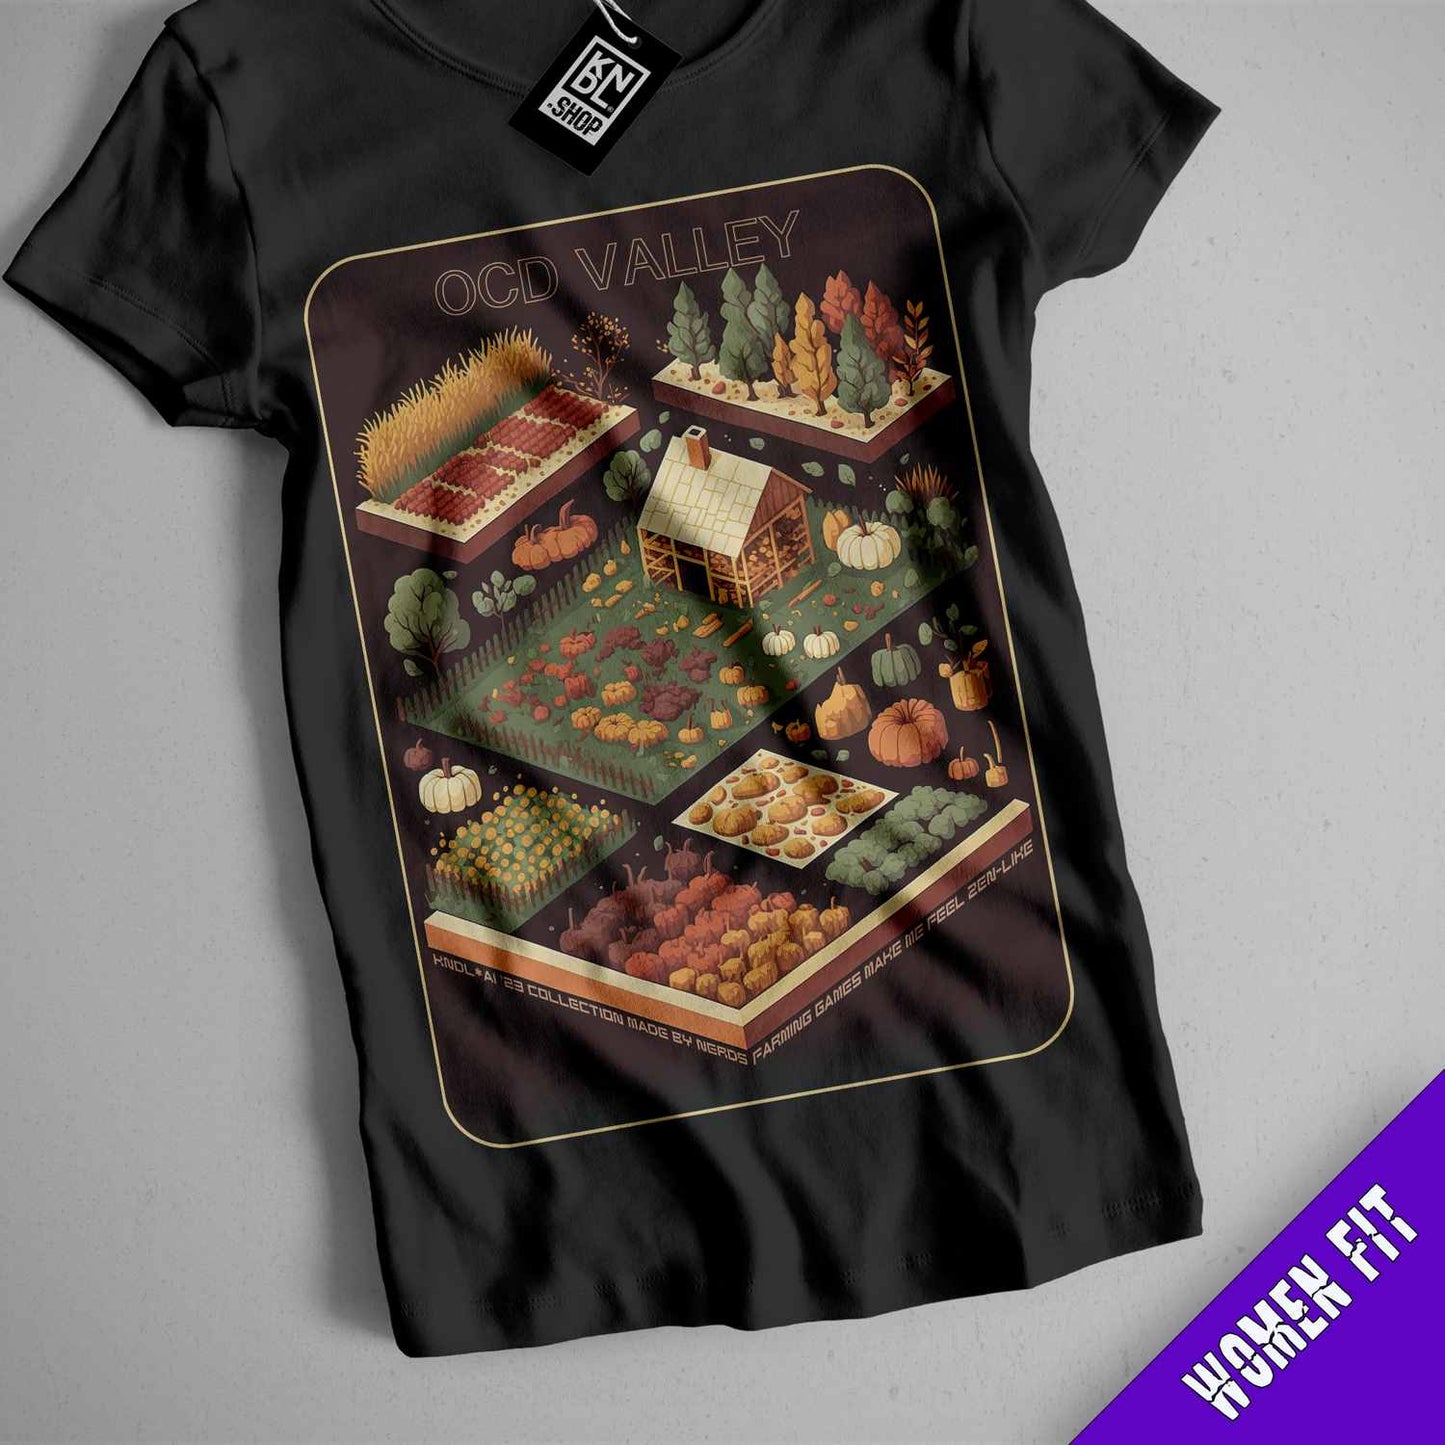 a black t - shirt with a picture of a vegetable garden